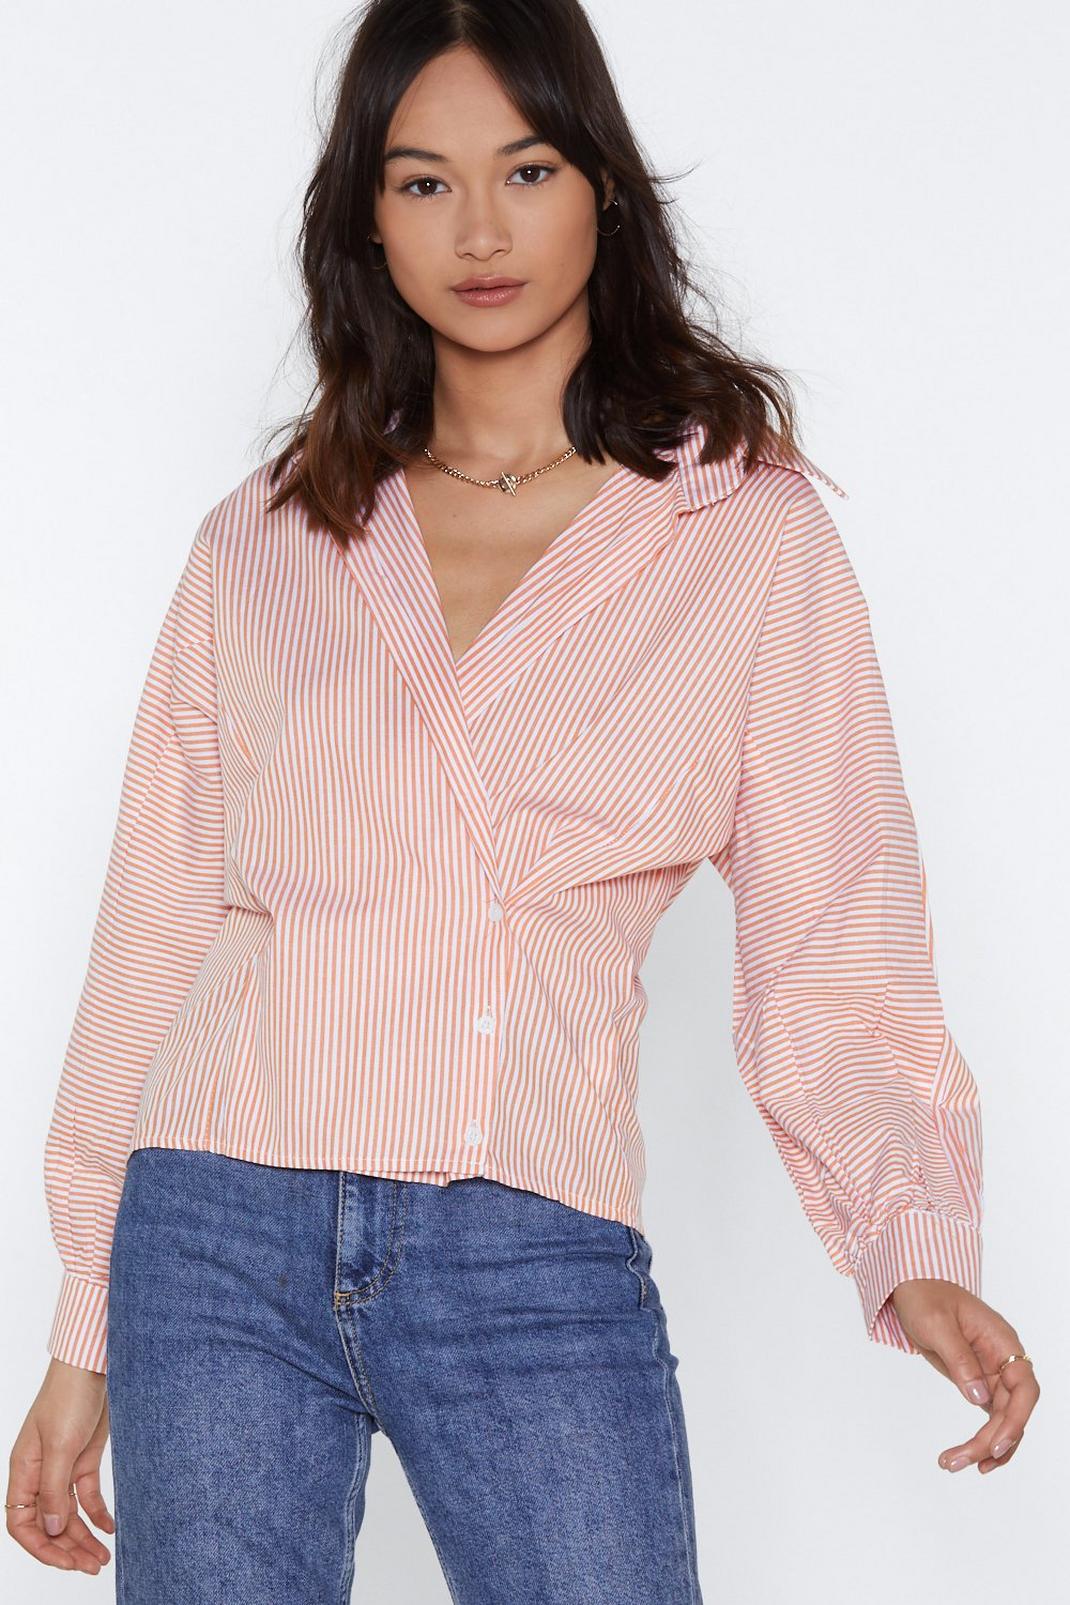 Shirt It Out Striped Shirt image number 1